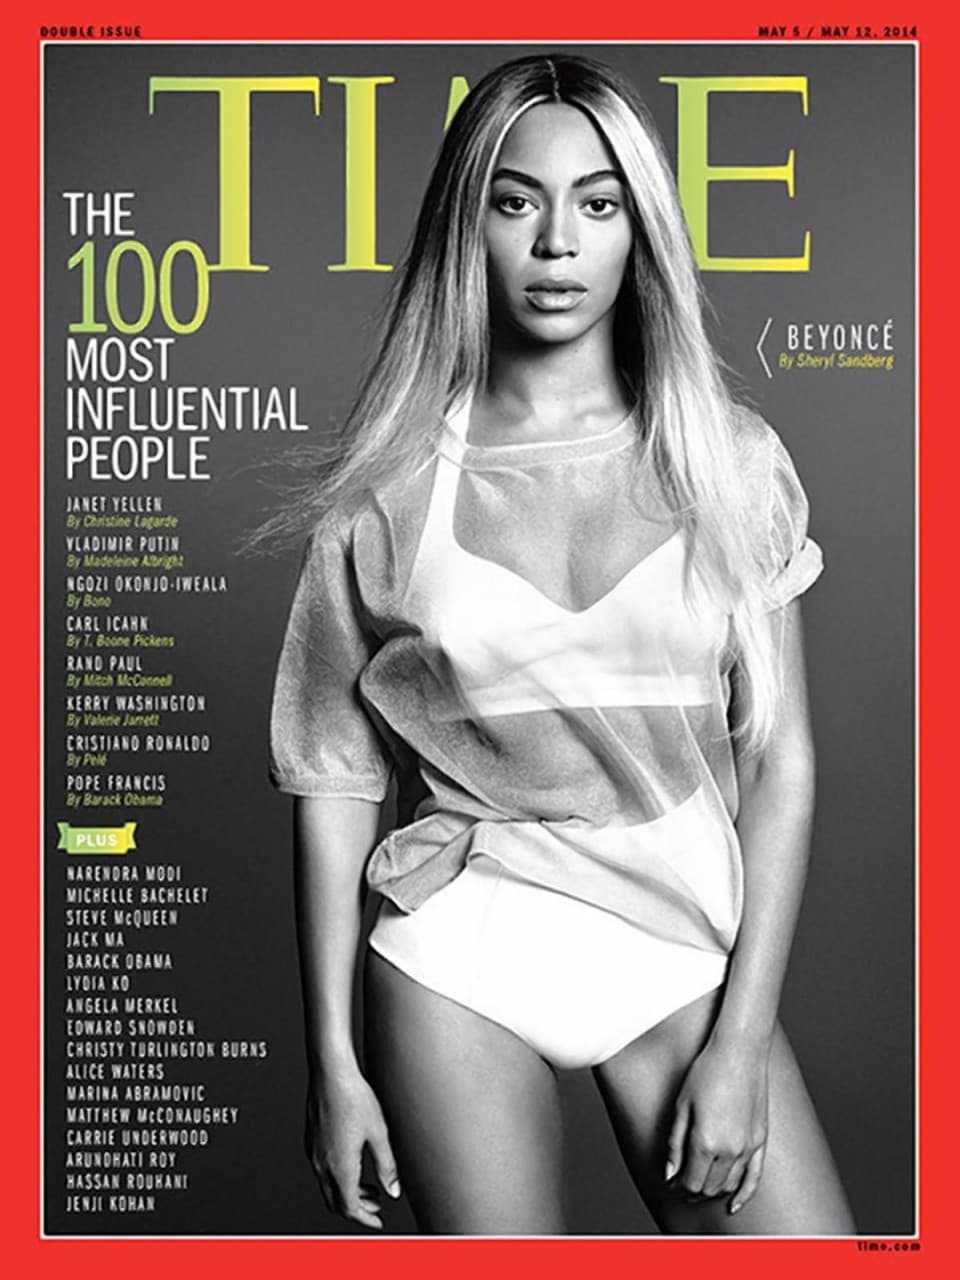 Beyonce on the cover of Time.